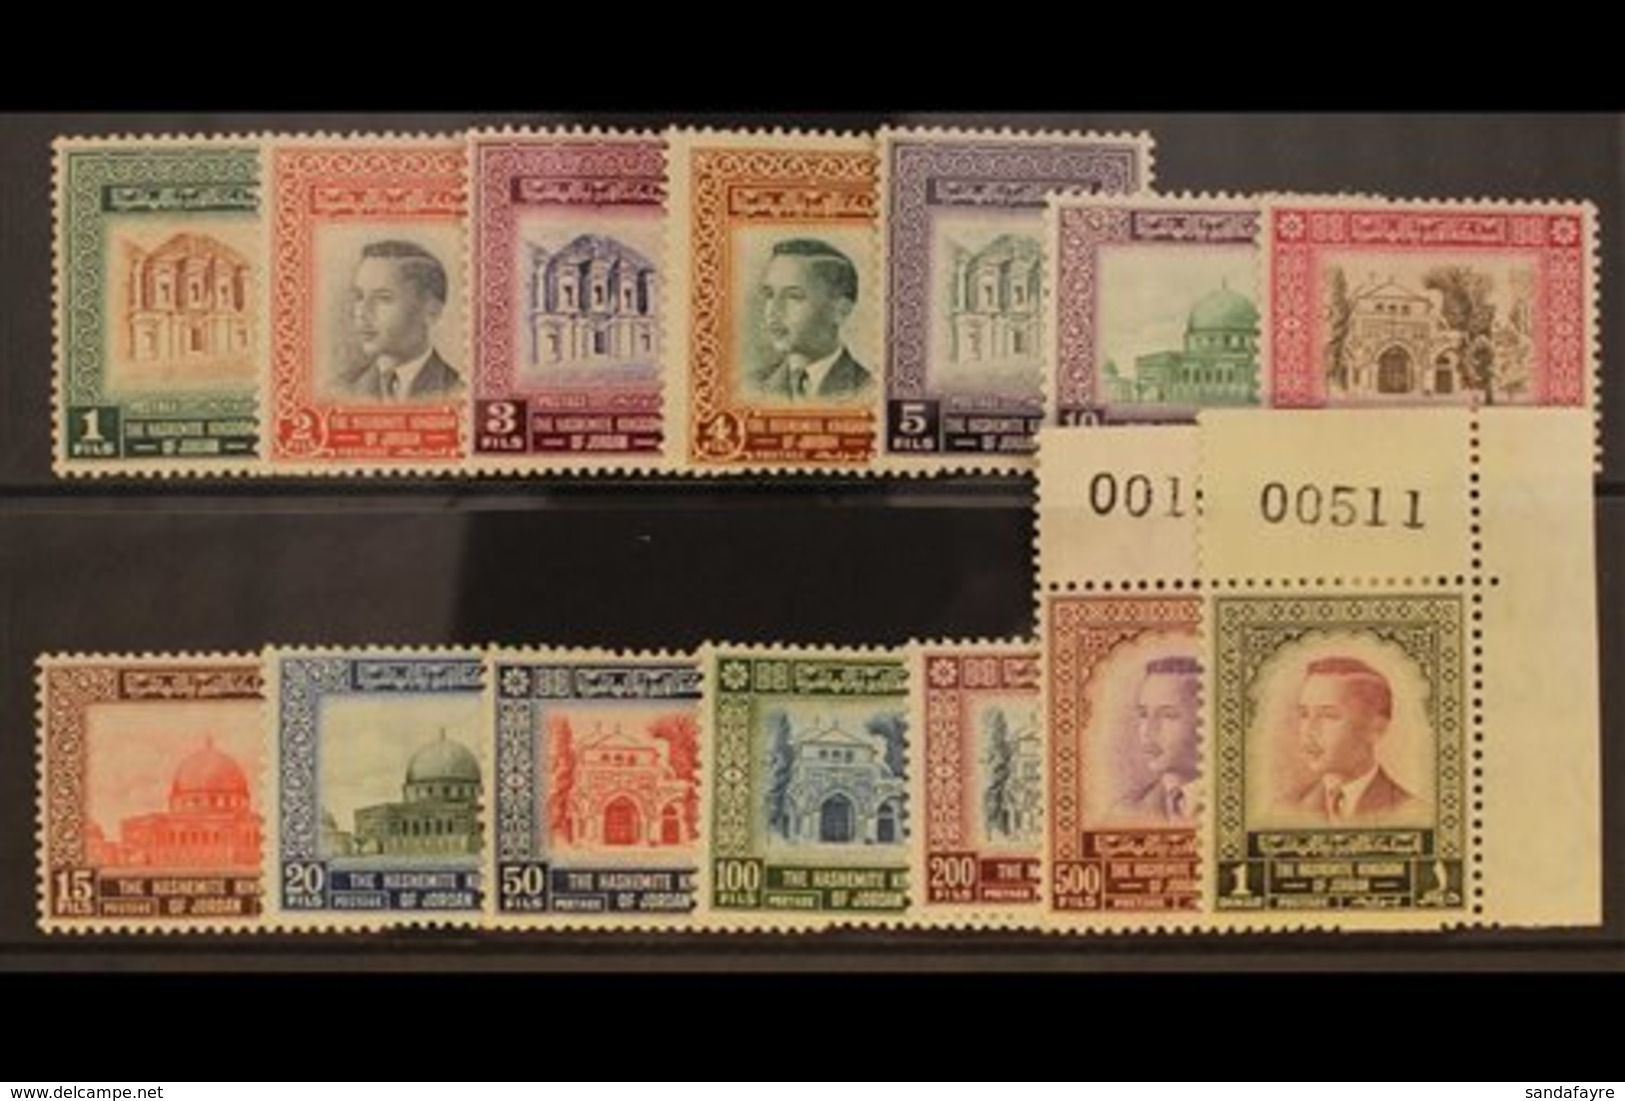 1955-65  Hussein Pictorial Wmk Set, SG 445/58, Never Hinged Mint (14 Stamps) For More Images, Please Visit Http://www.sa - Jordanien